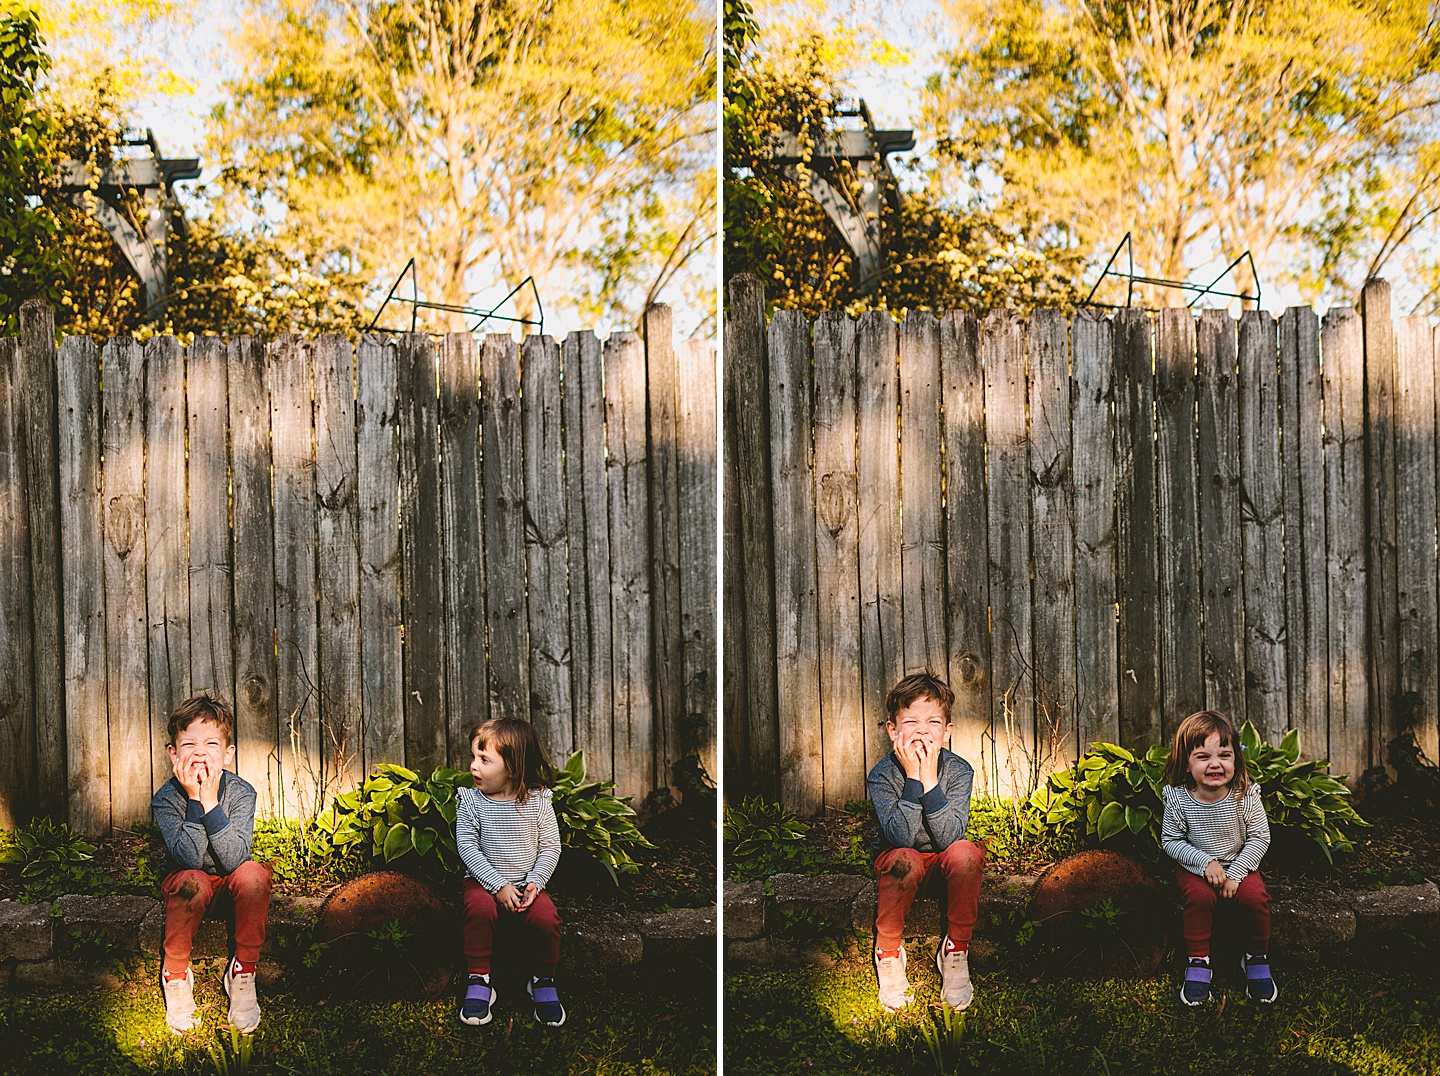 Siblings smiling by a fence in yard